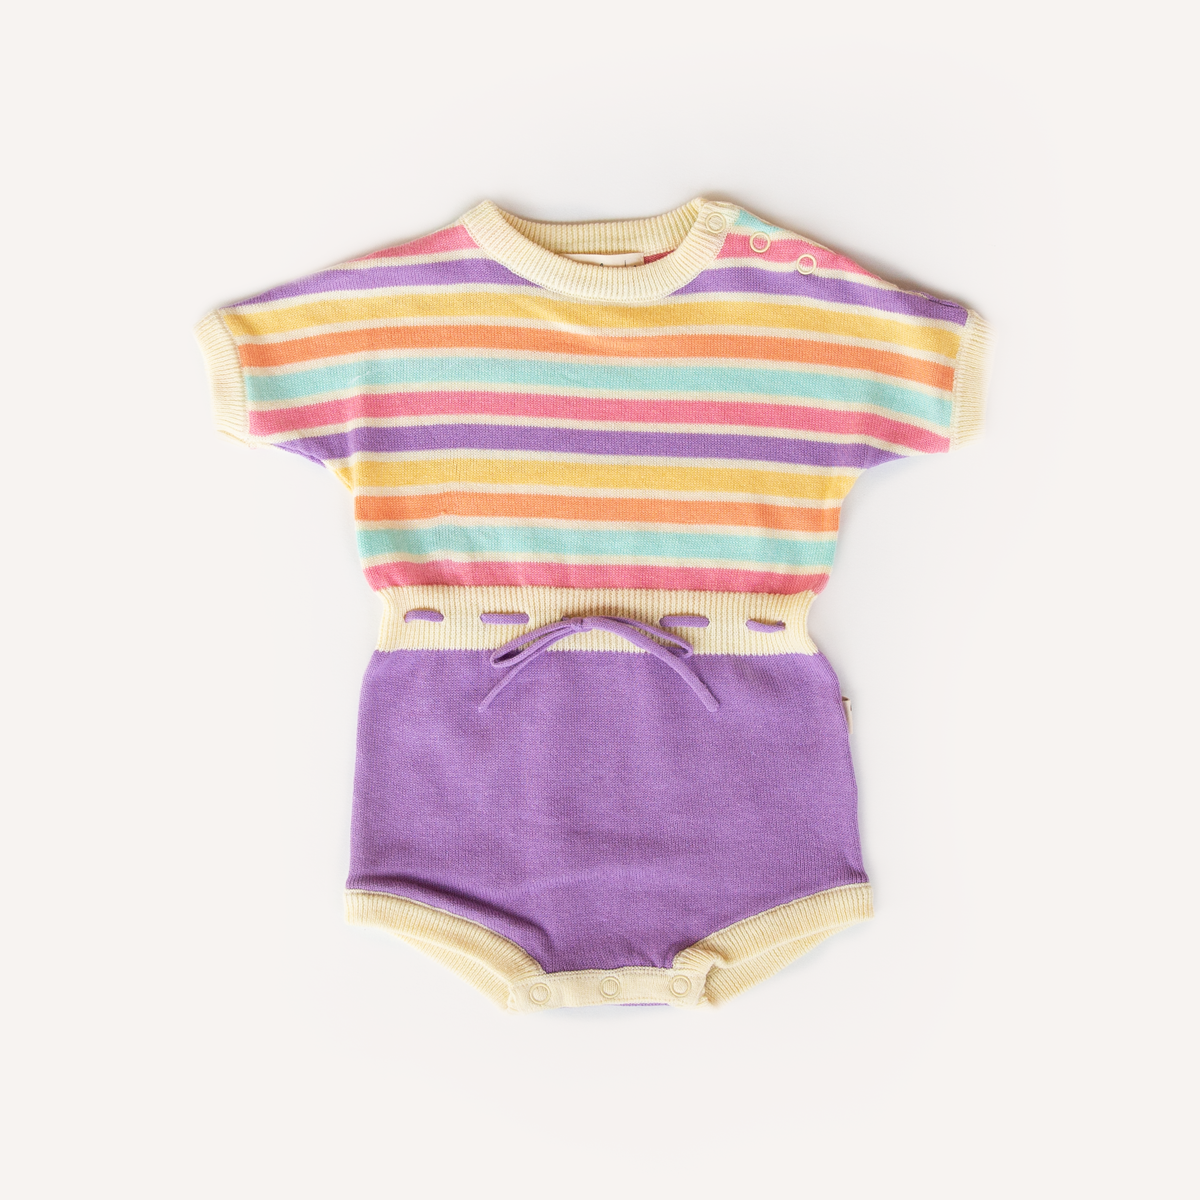 Cute baby girls romper in pastel rainbow colours